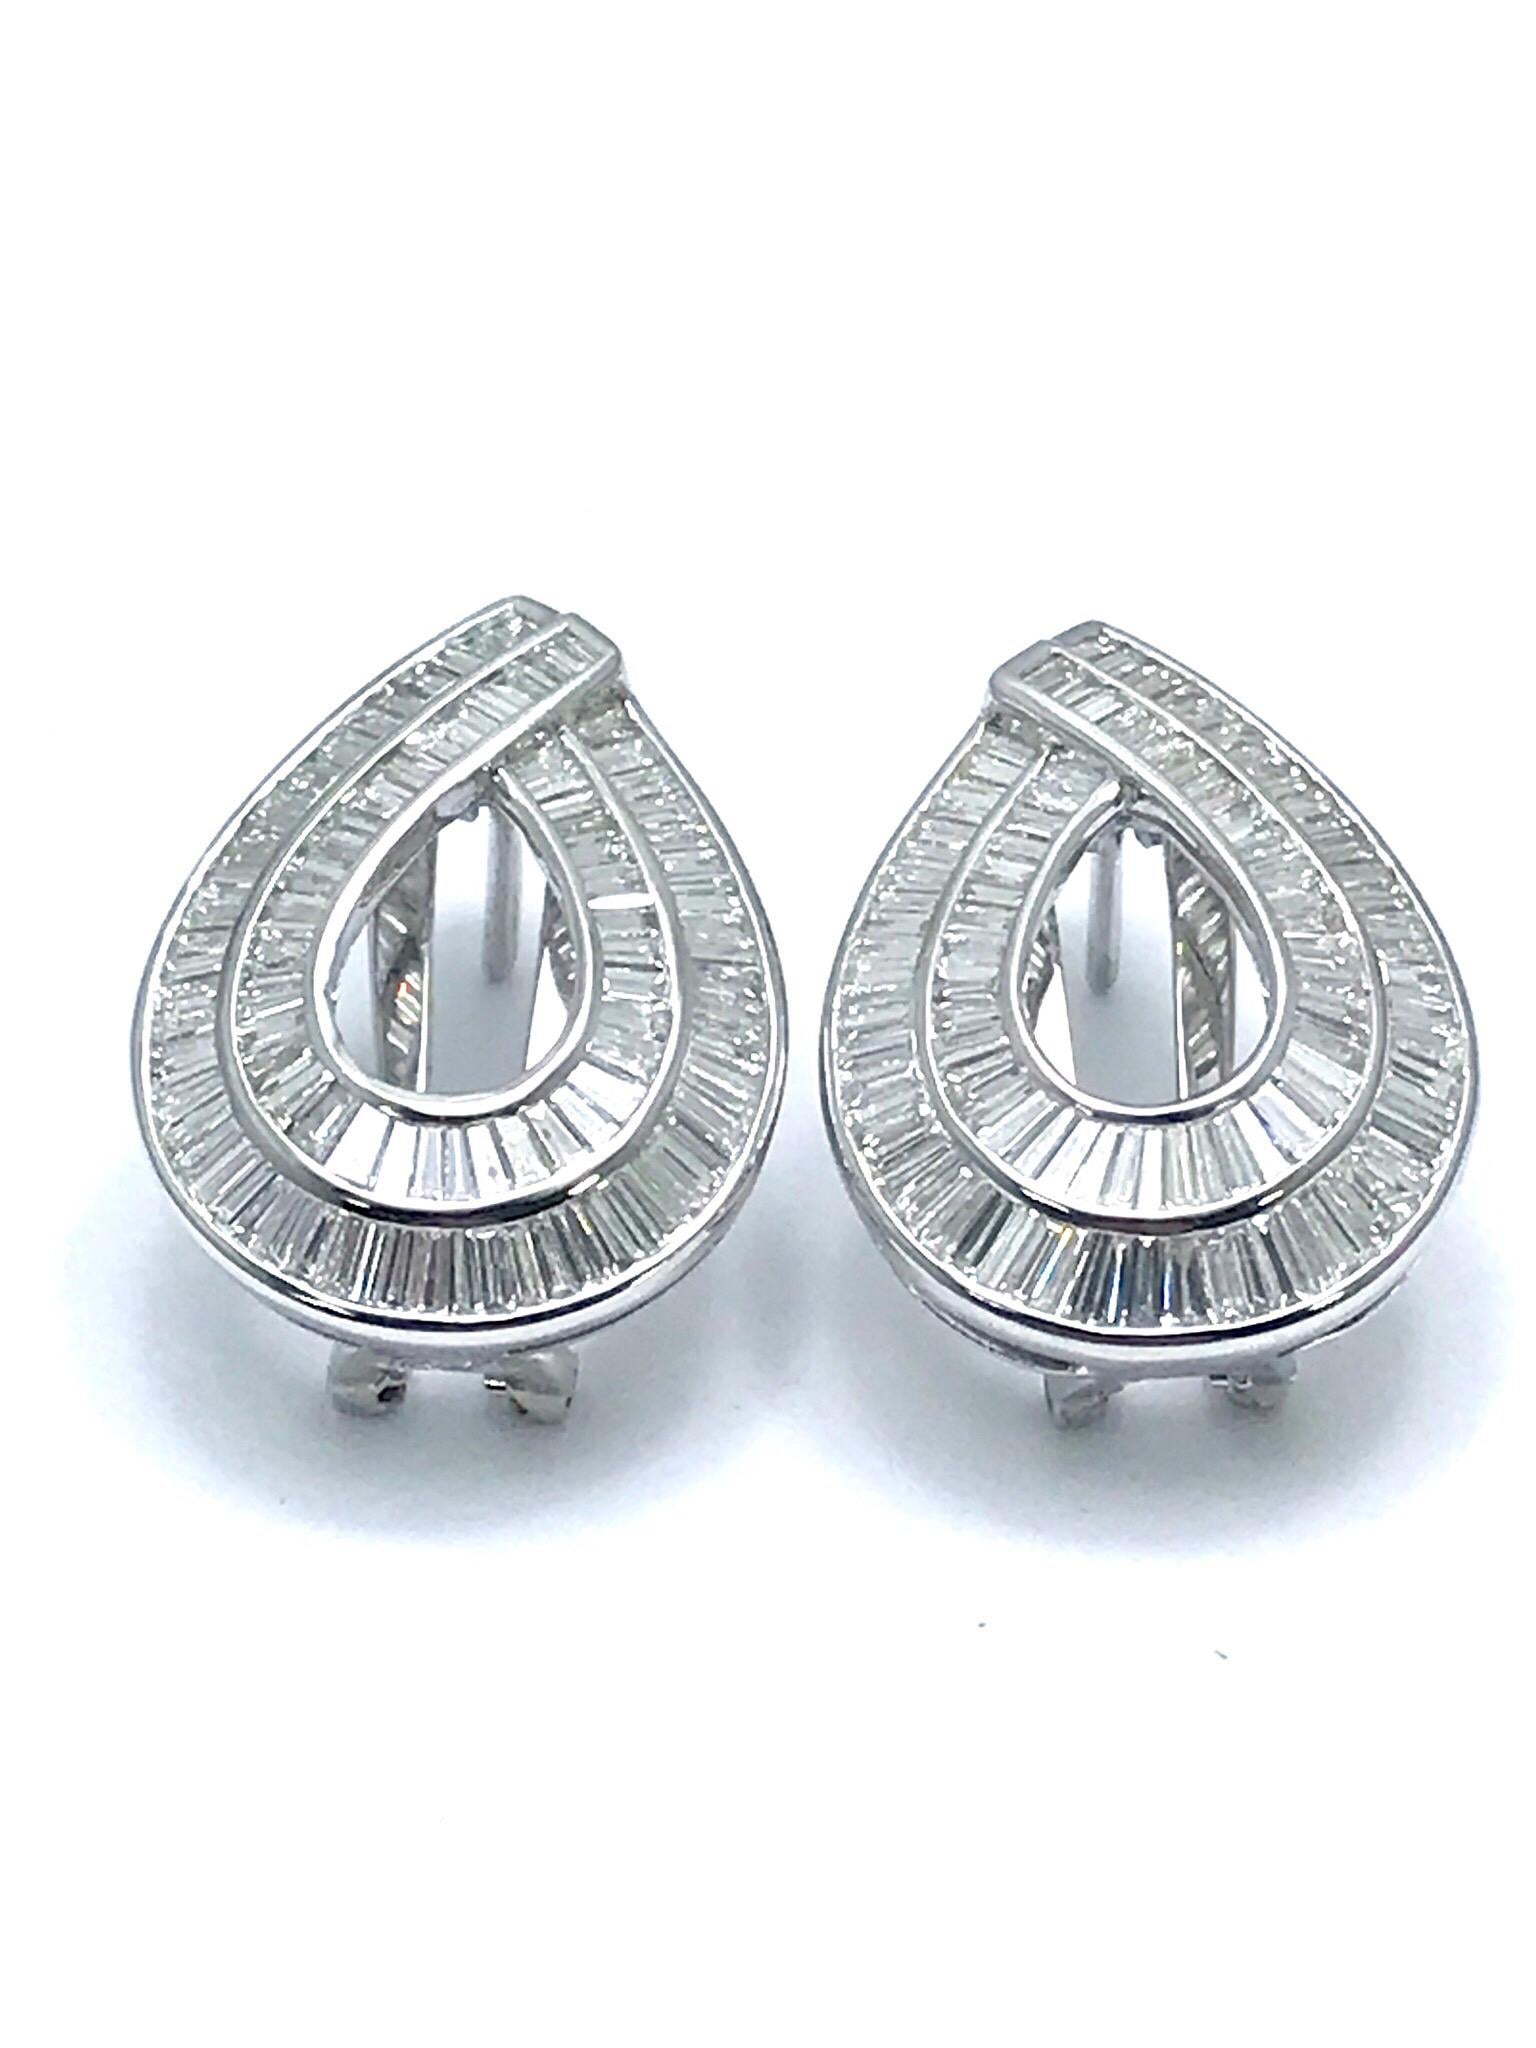 This is a stunning pair of 3.75 carats channel set baguette Diamond and 18 karat white gold clip and post earrings.  The baguette Diamonds are set in two rows making a pear shape, they are graded as G-H color, VS clarity.  The earrings feature a